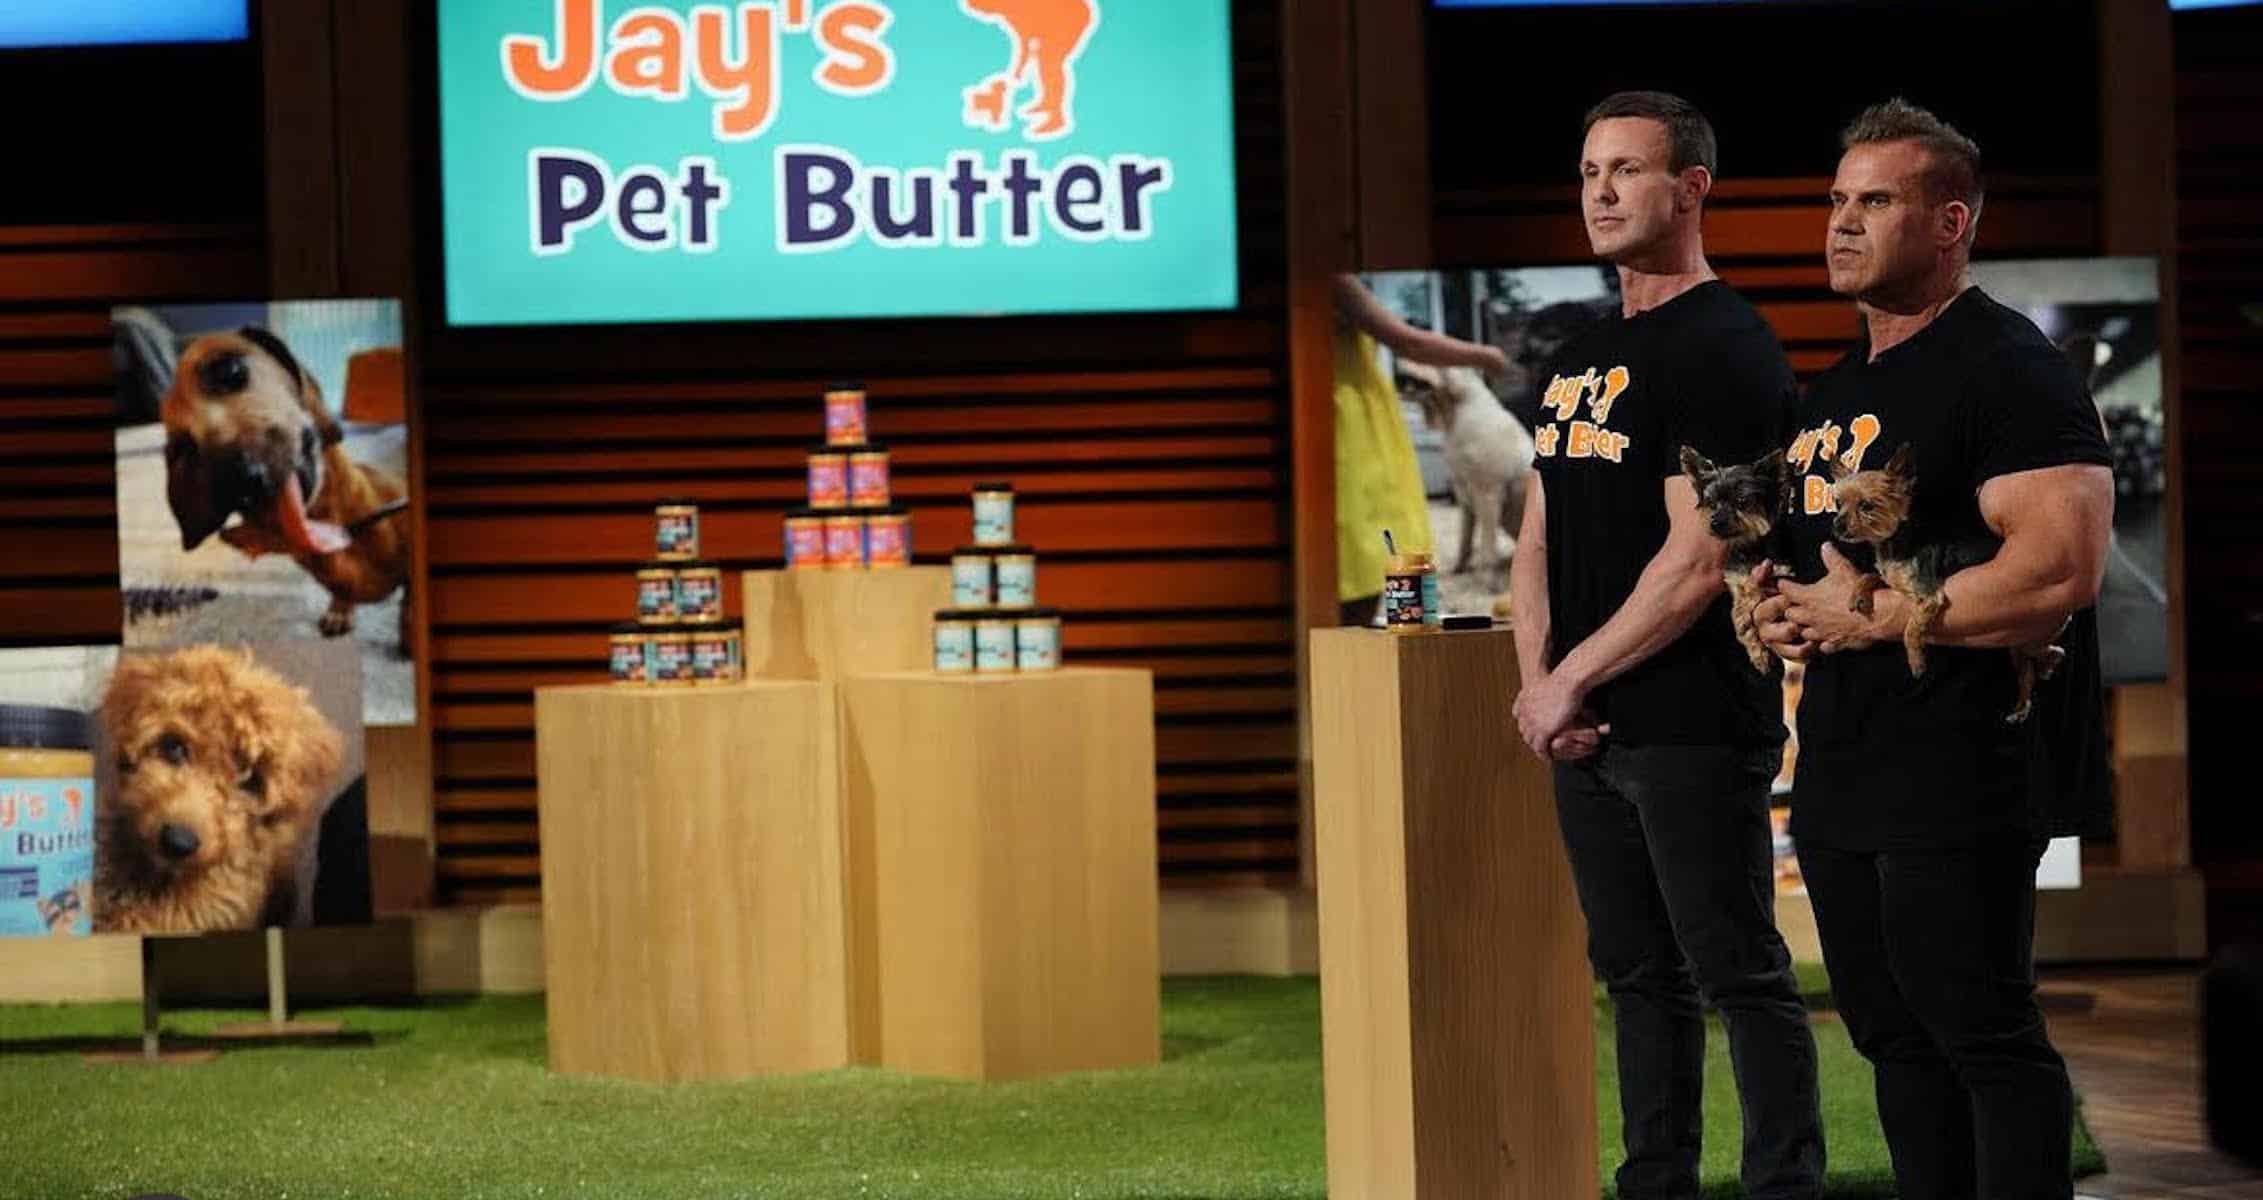 Jay Cutler To Appear On This Week's Shark Tank Pitching Jay's Pet